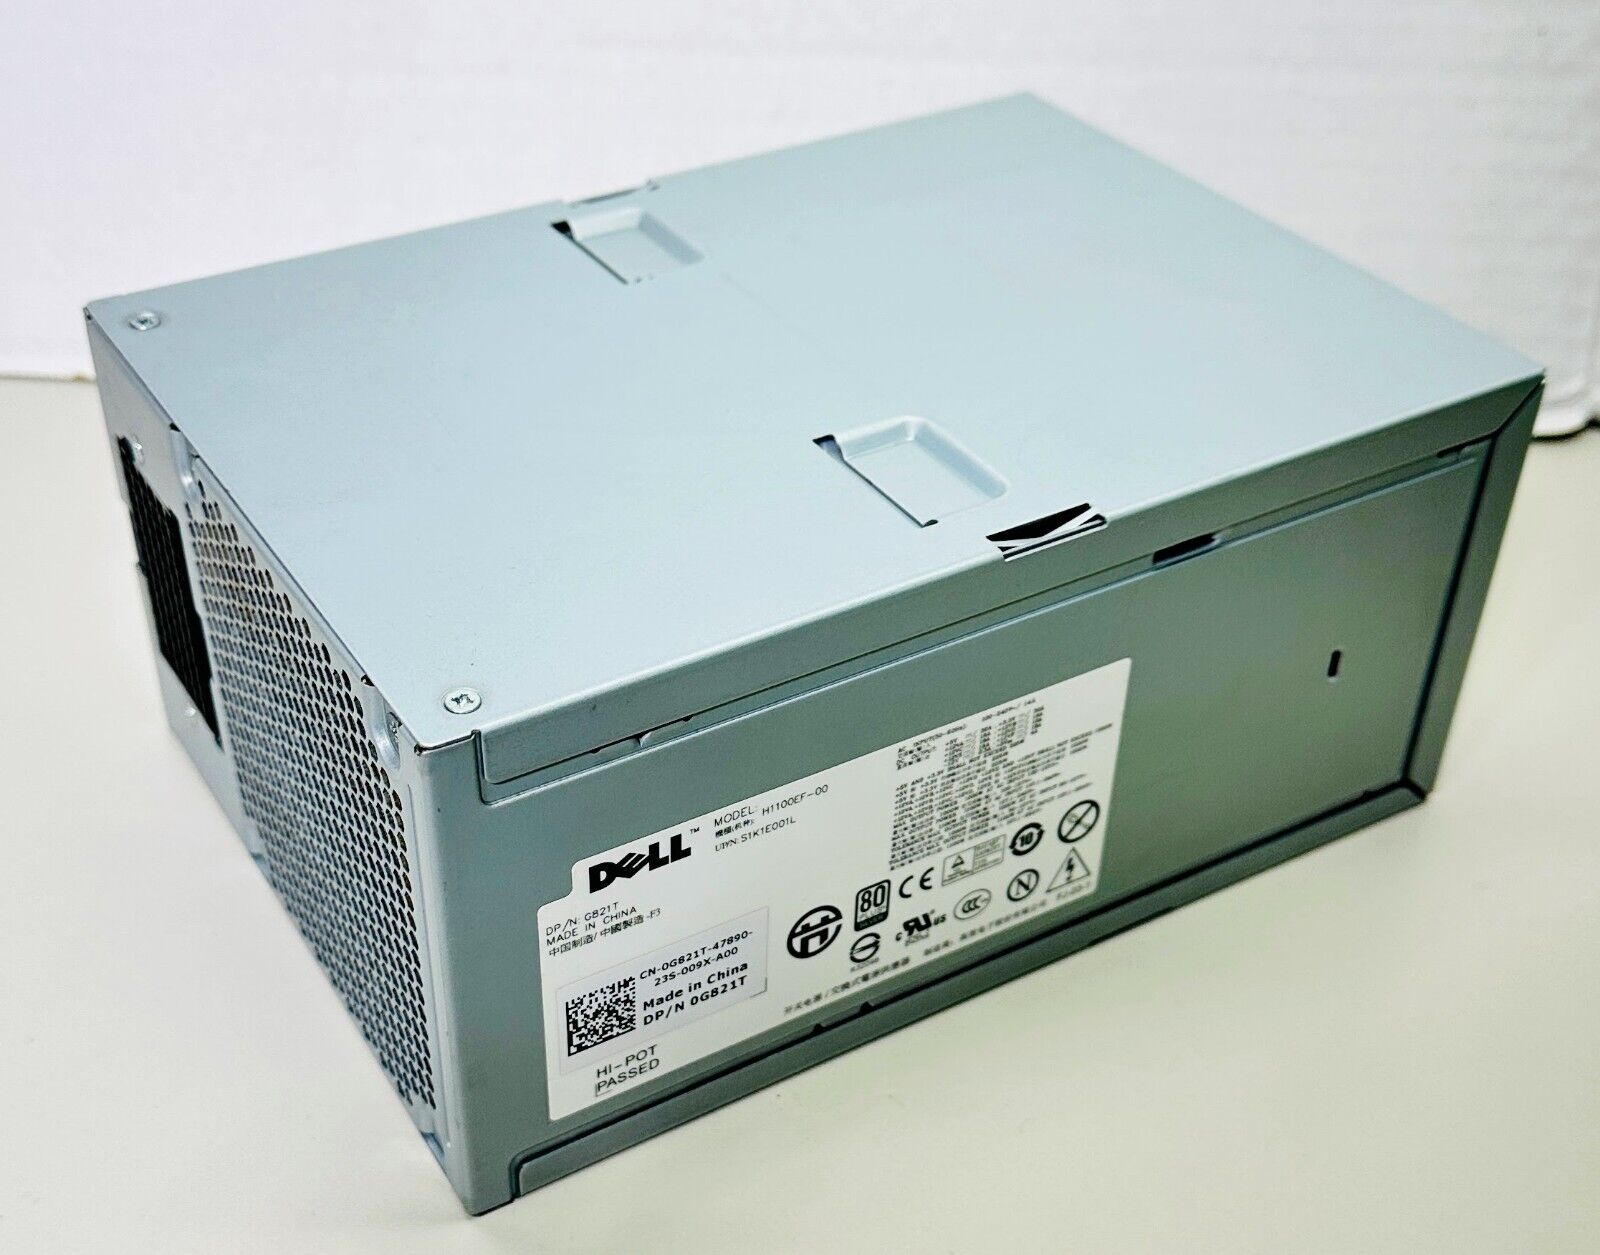 Dell Precision T7500 PSU H1100EF G821T 0G821T 1100w Power Supply TESTED